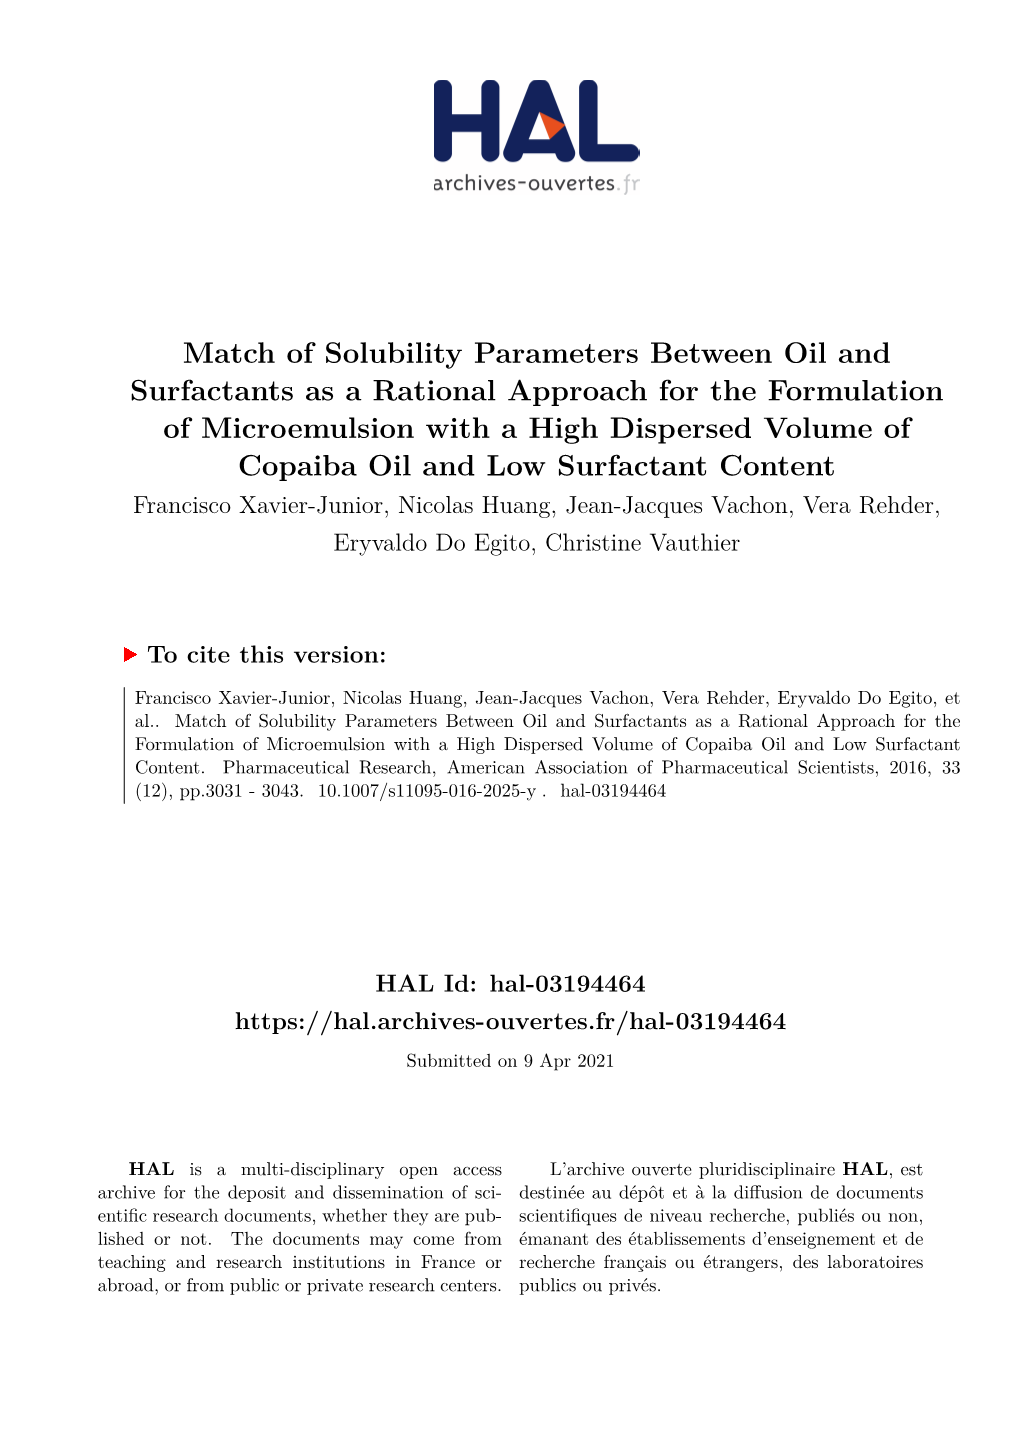 Match of Solubility Parameters Between Oil and Surfactants As A